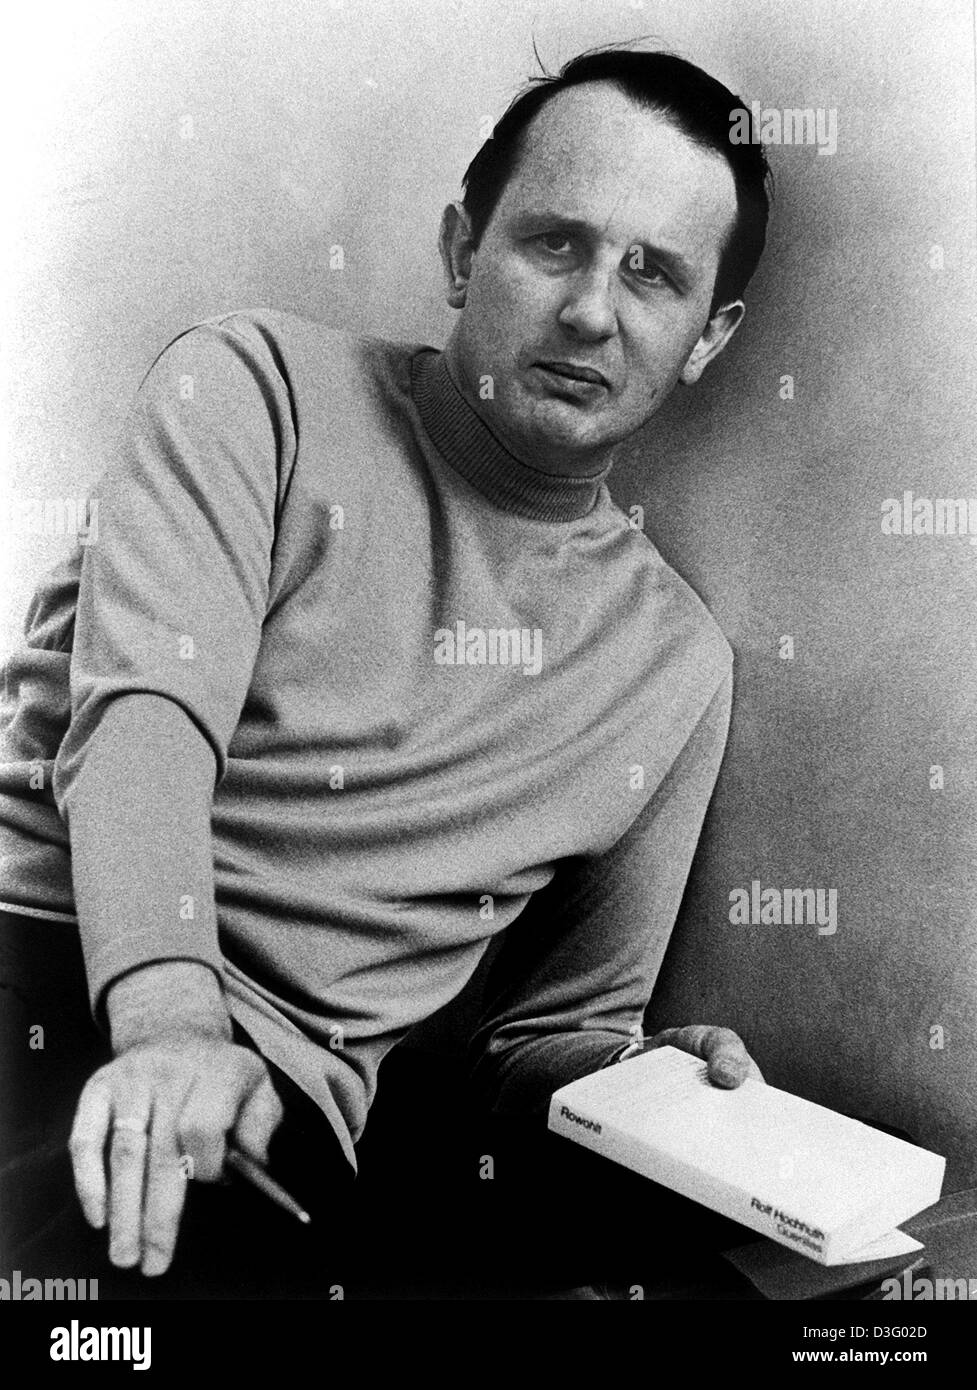 (dpa files) - German author Rolf Hochhuth is posing with his new book 'Guerillas', Stuttgart, 14 May 1970. The play had its world premiere on stage in Stuttgart on 15 May 1970. It is about the preparation of a coup d'etat in the USA. Hochhuth is best known for his drama 'The Substitute' ('Der Stellvertreter') which caused great controversy in the early 1960s as it deals with ties b Stock Photo